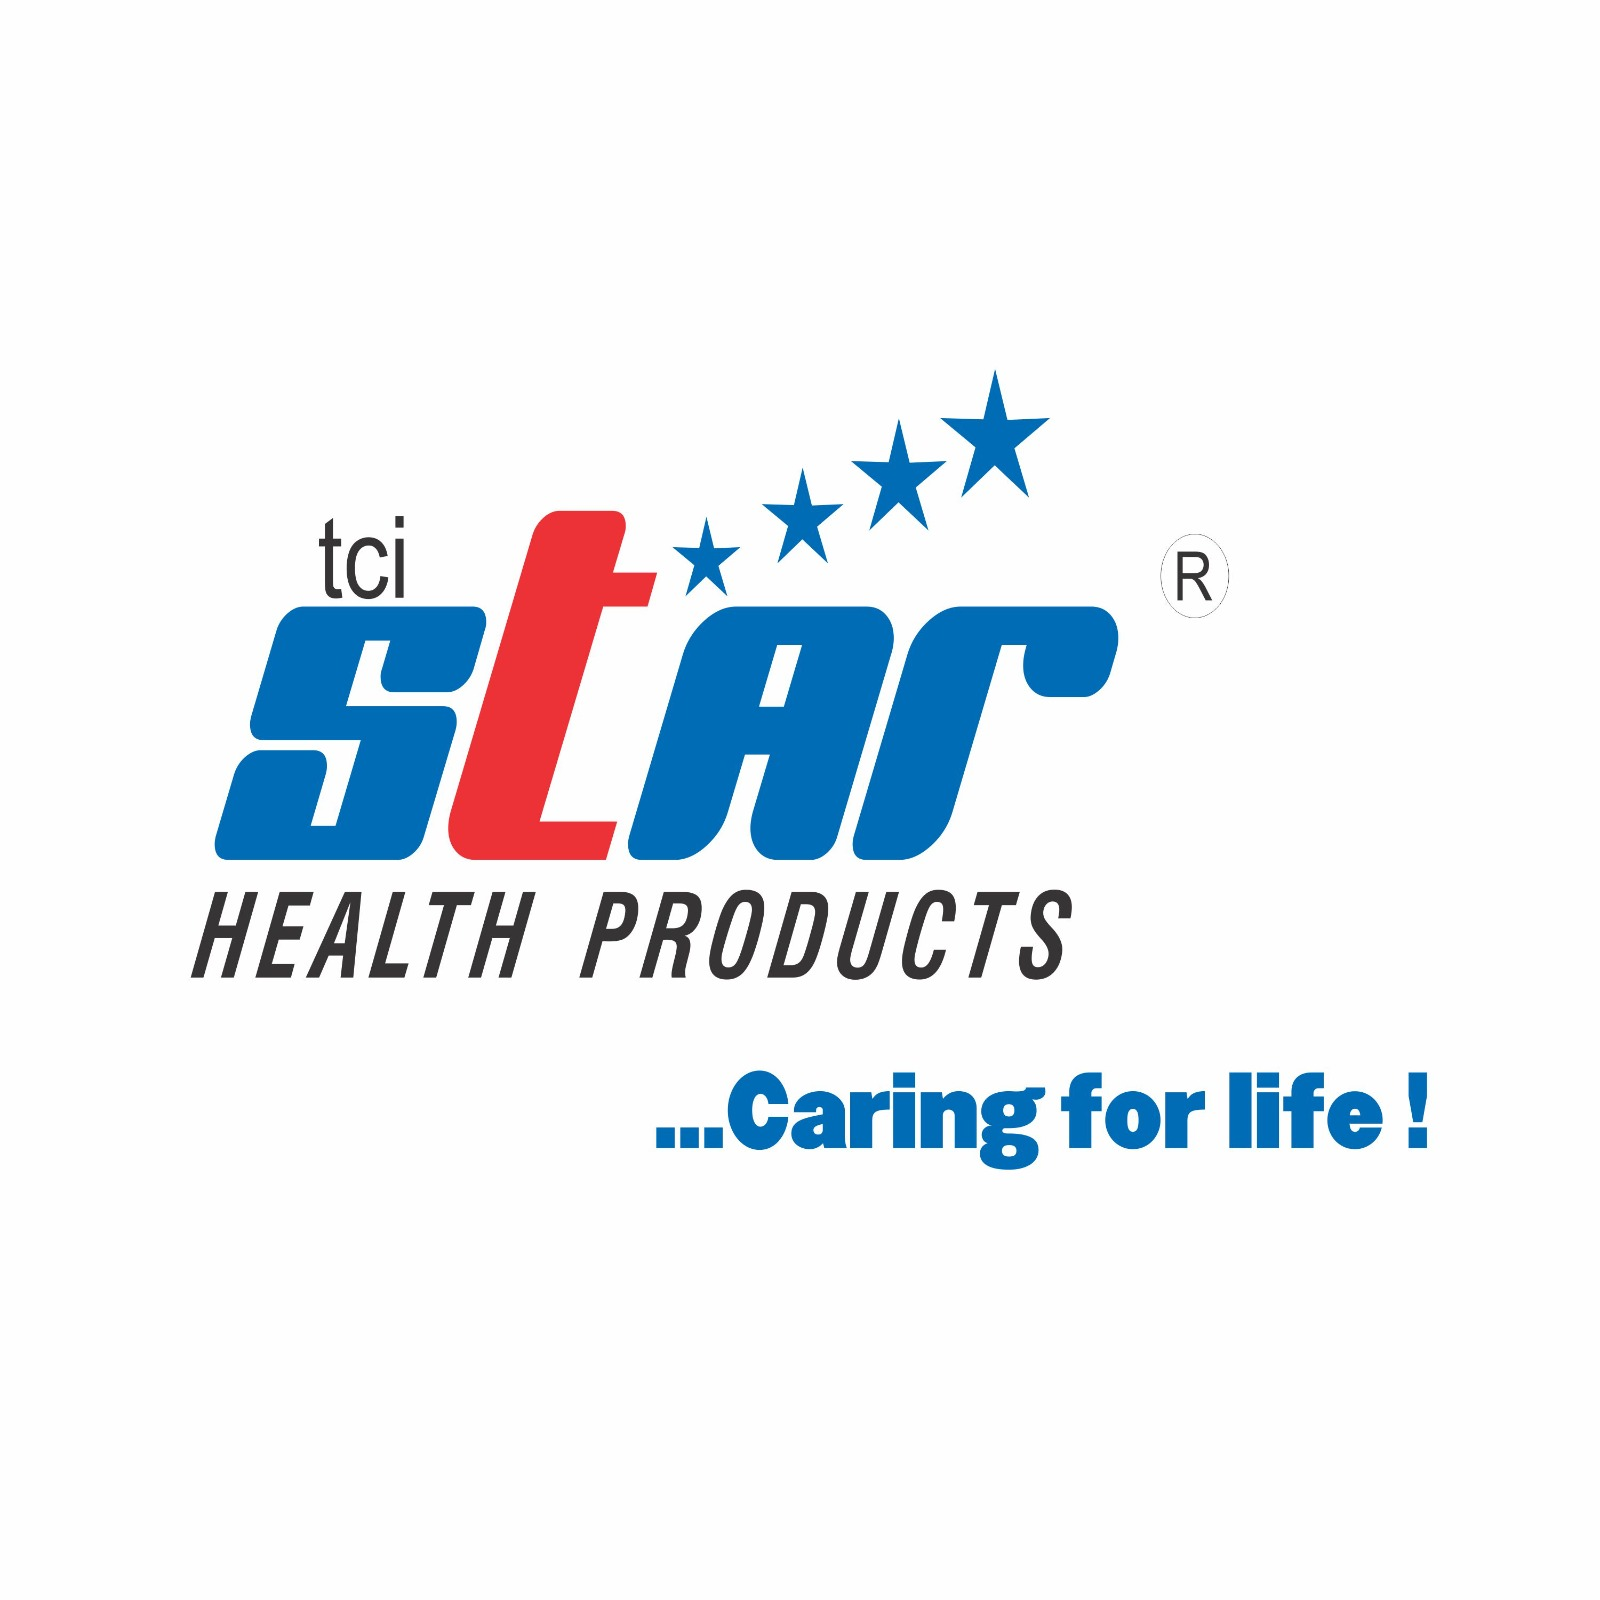 tcistarhealthproducts